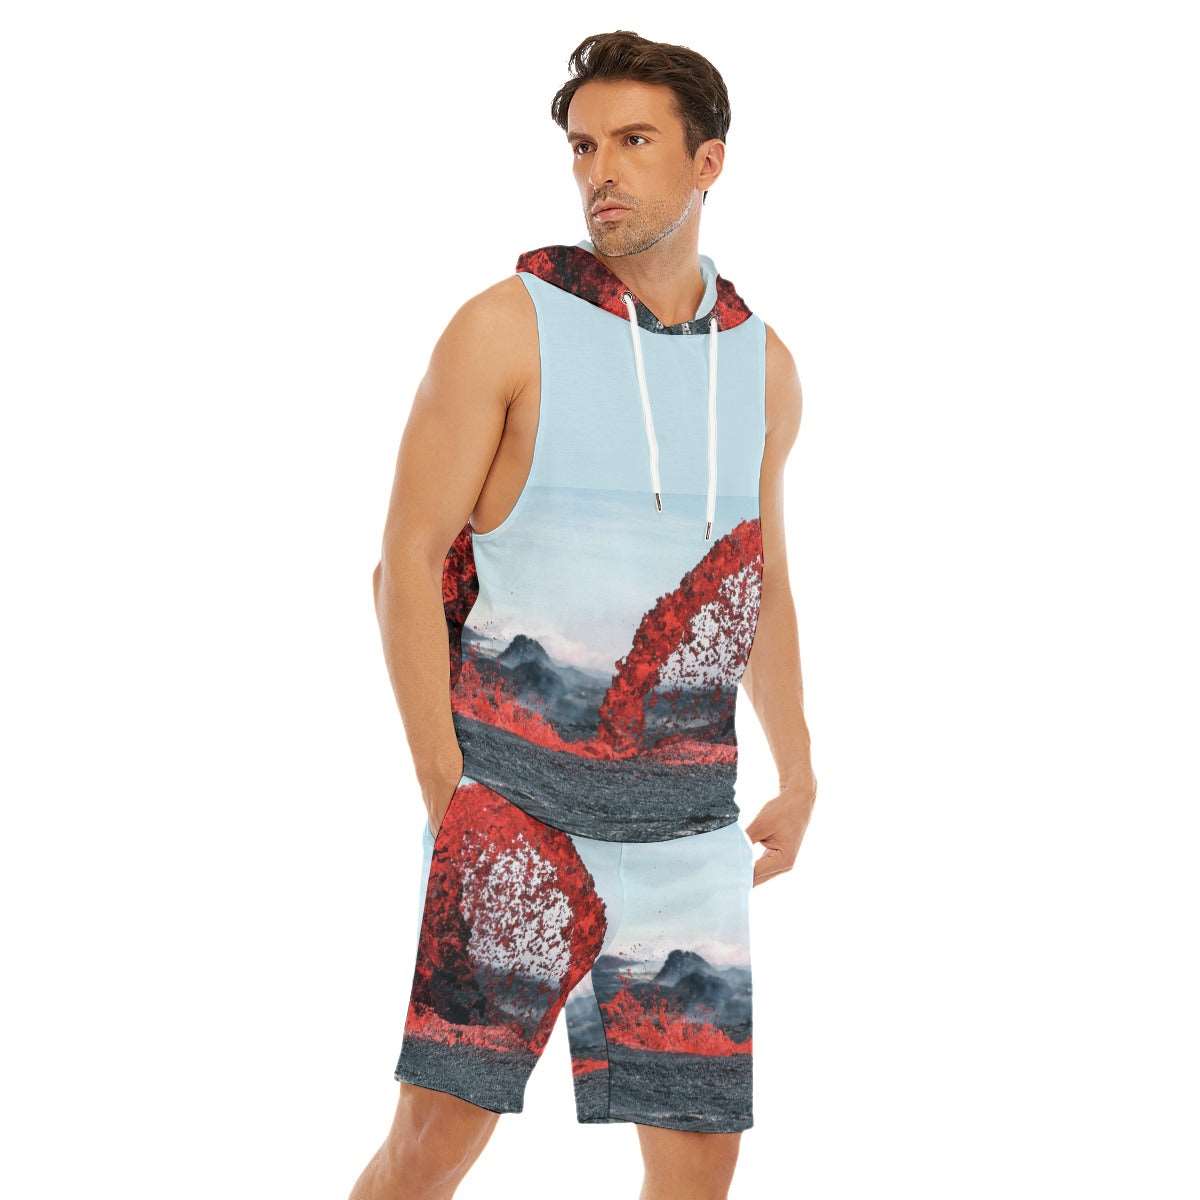 Cool under pressure Sleeveless Vest And Shorts Sets